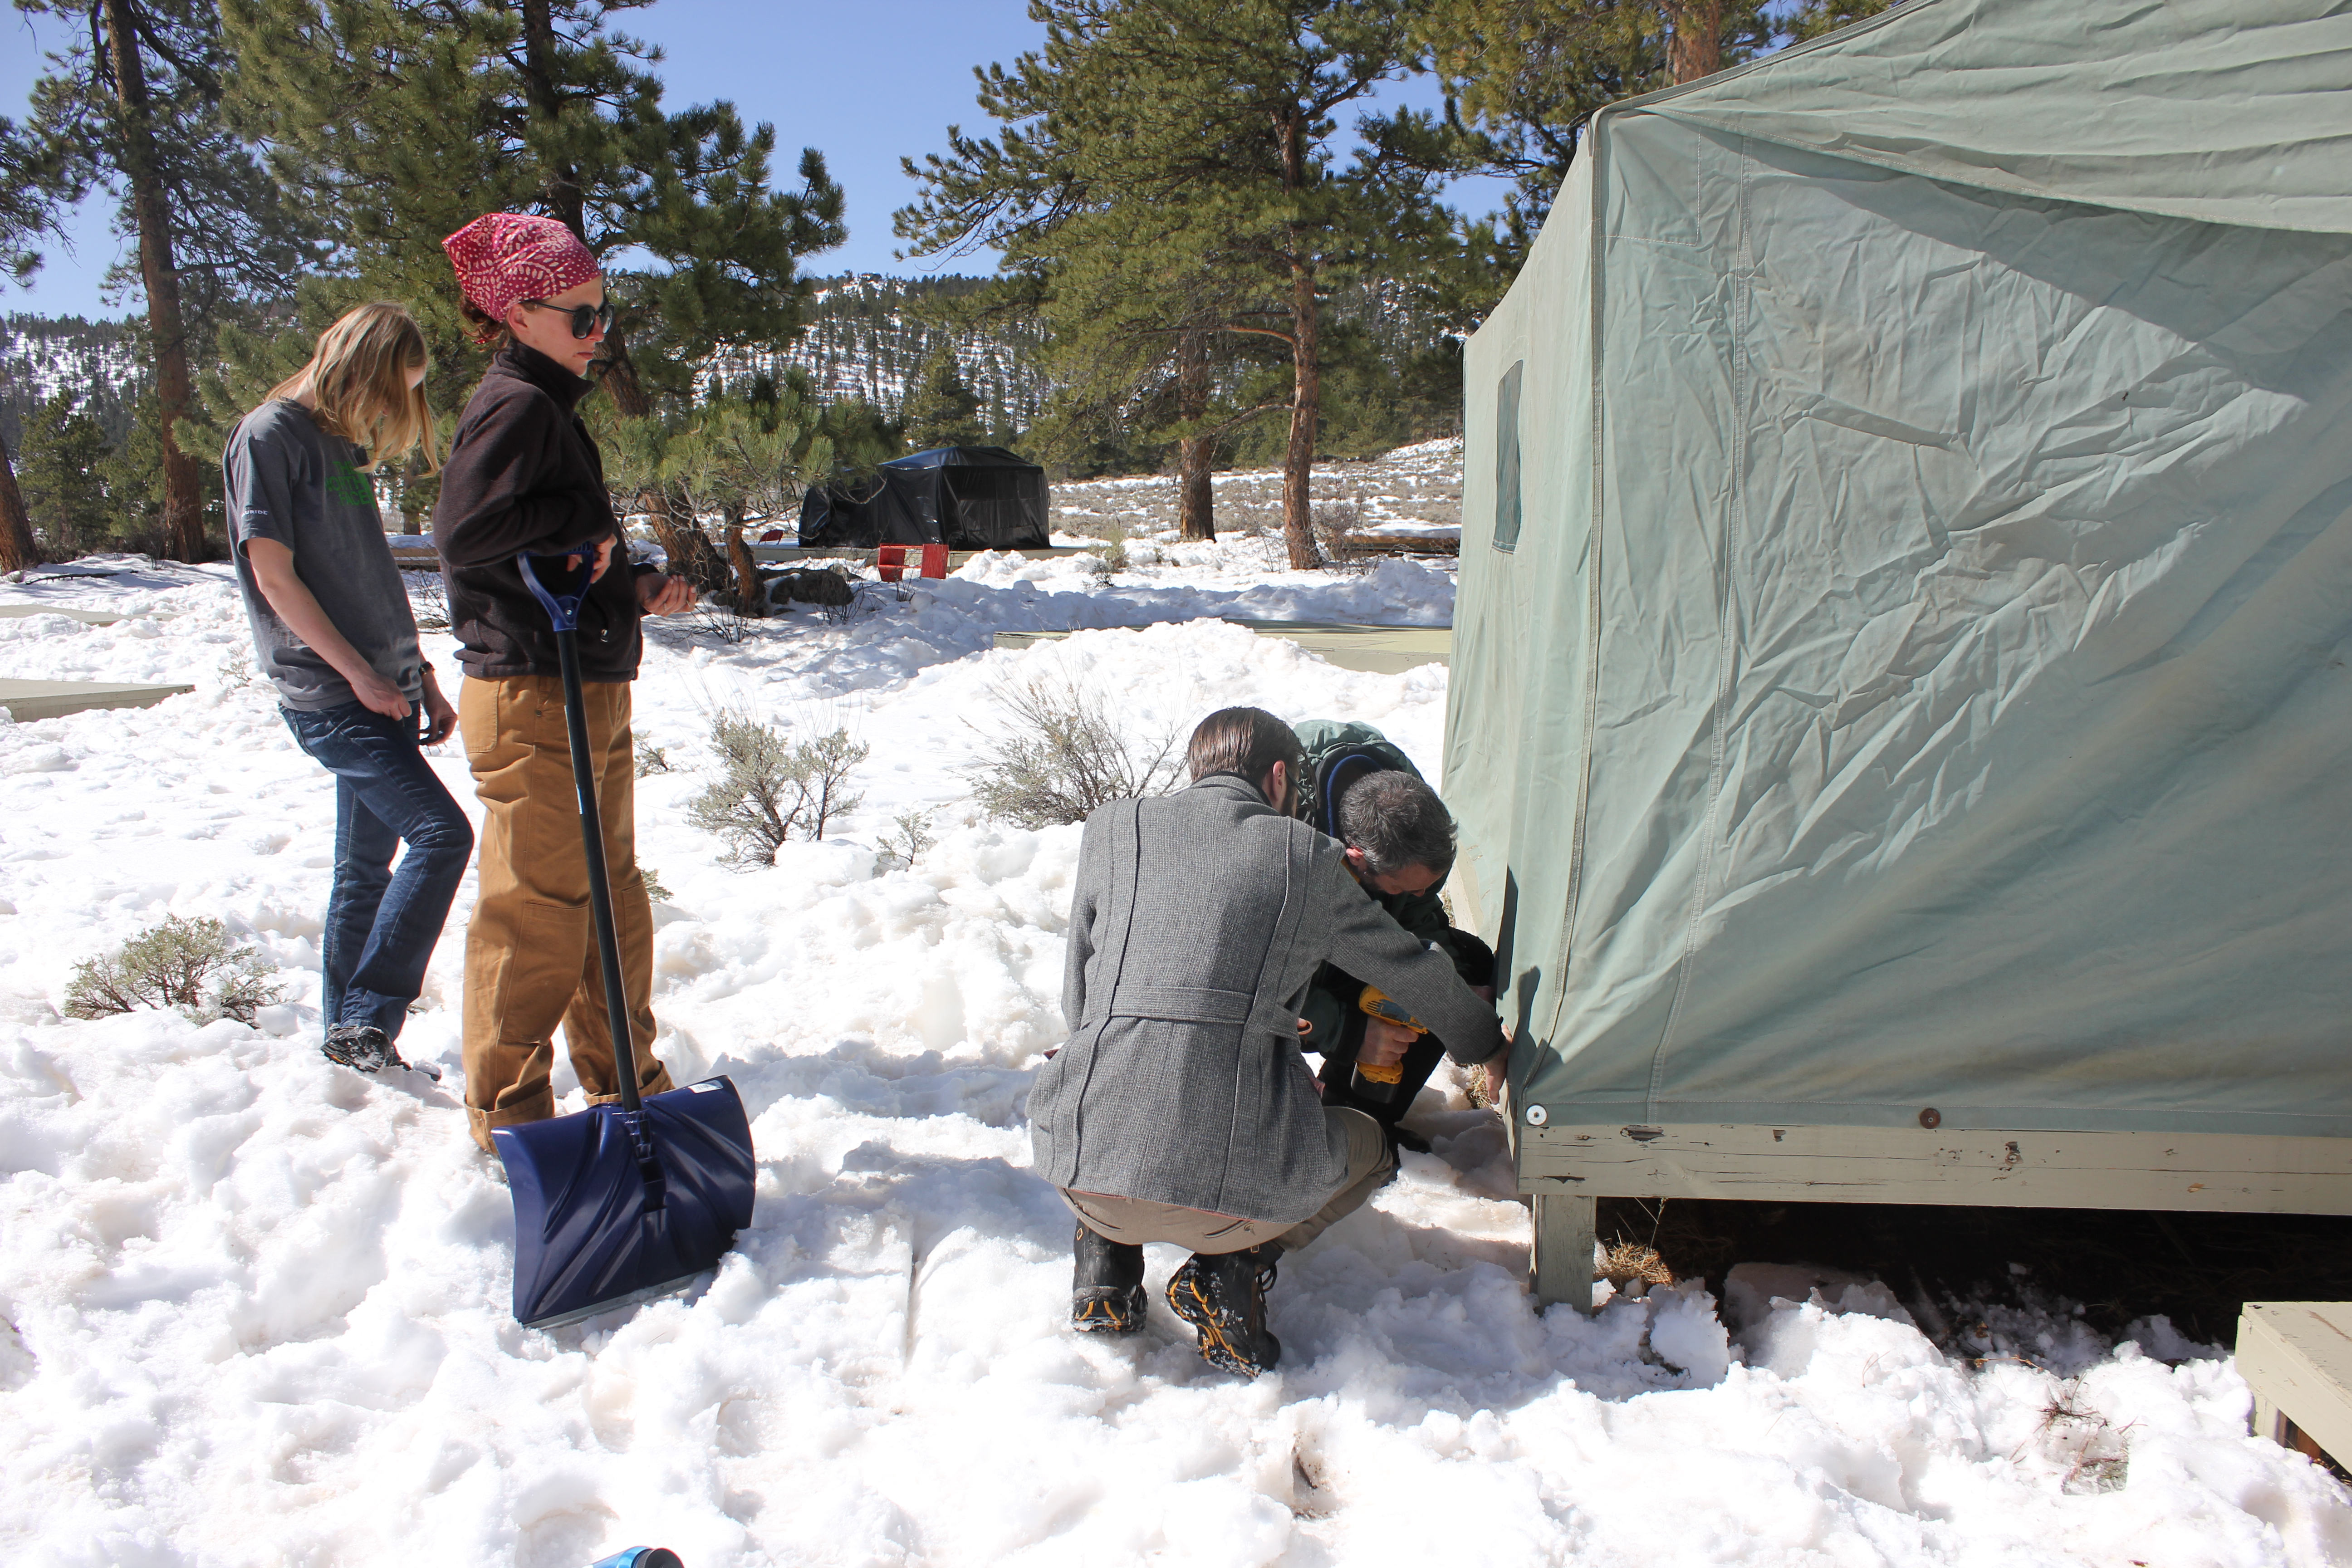 setting up a tent in the snow